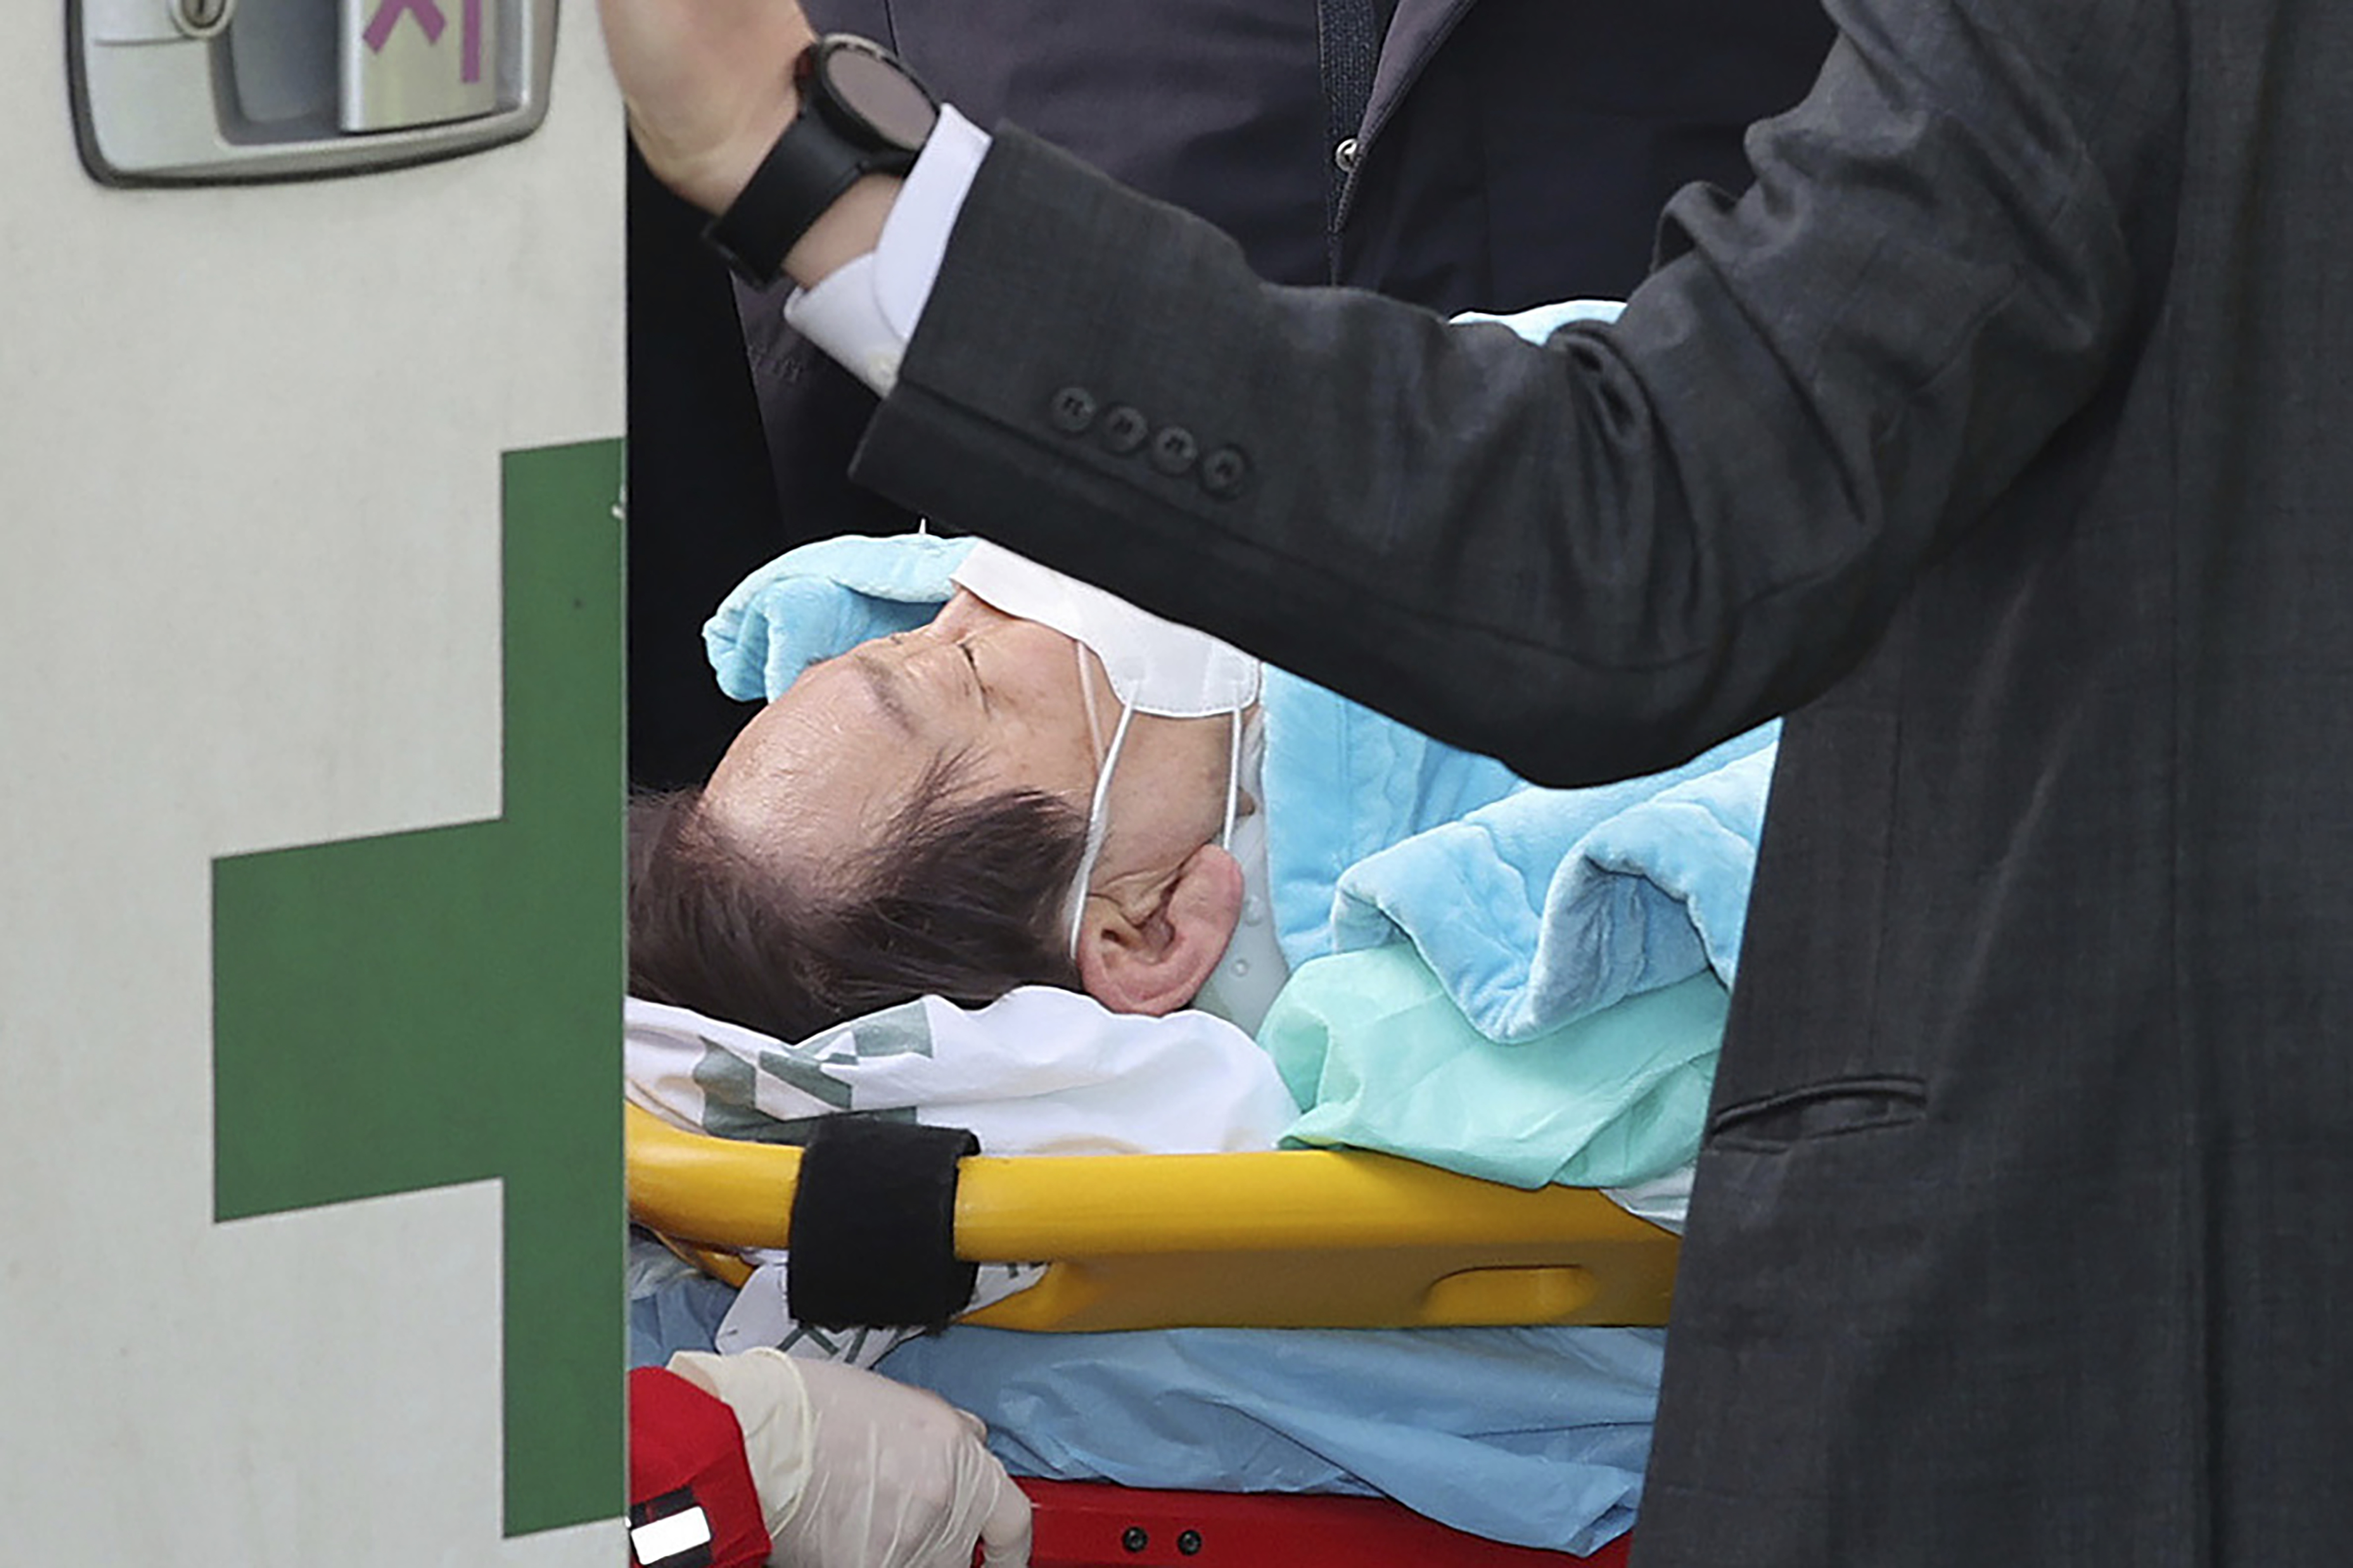 FILE - Then South Korea's main opposition Democratic Party leader Lee Jae-myung on a stretcher arrives at a heliport in Seoul, South Korea, on Jan. 2, 2024. A man who stabbed Lee in the neck earlier this year was sentenced to 15 years in prison on Friday, July 5, 2024, court officials said. (Im Hwa-young/Yonhap via AP, File)